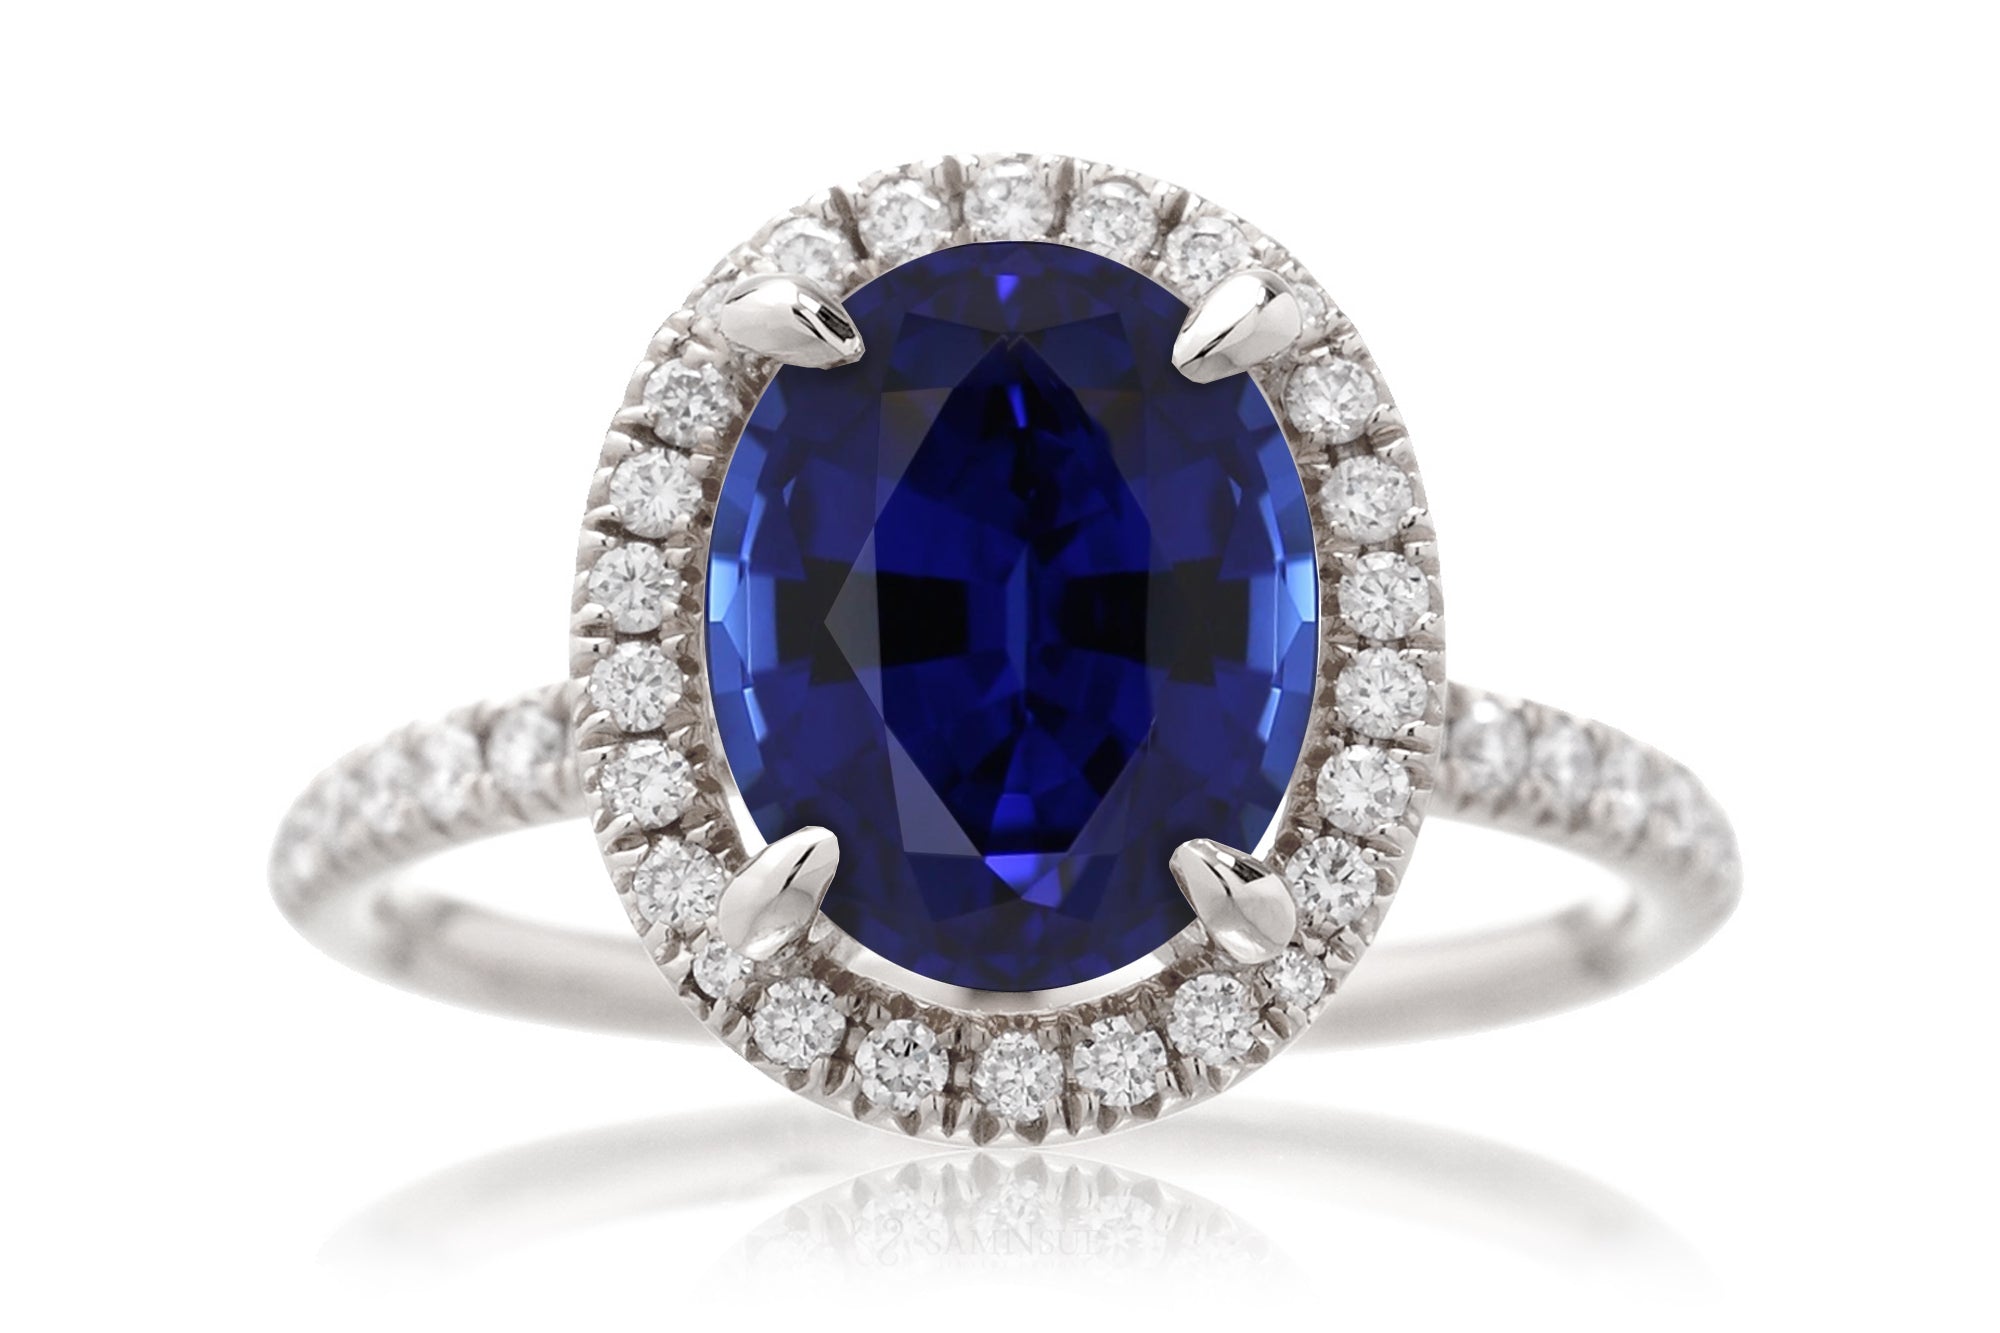 Oval sapphire diamond halo and band wedding rings white gold